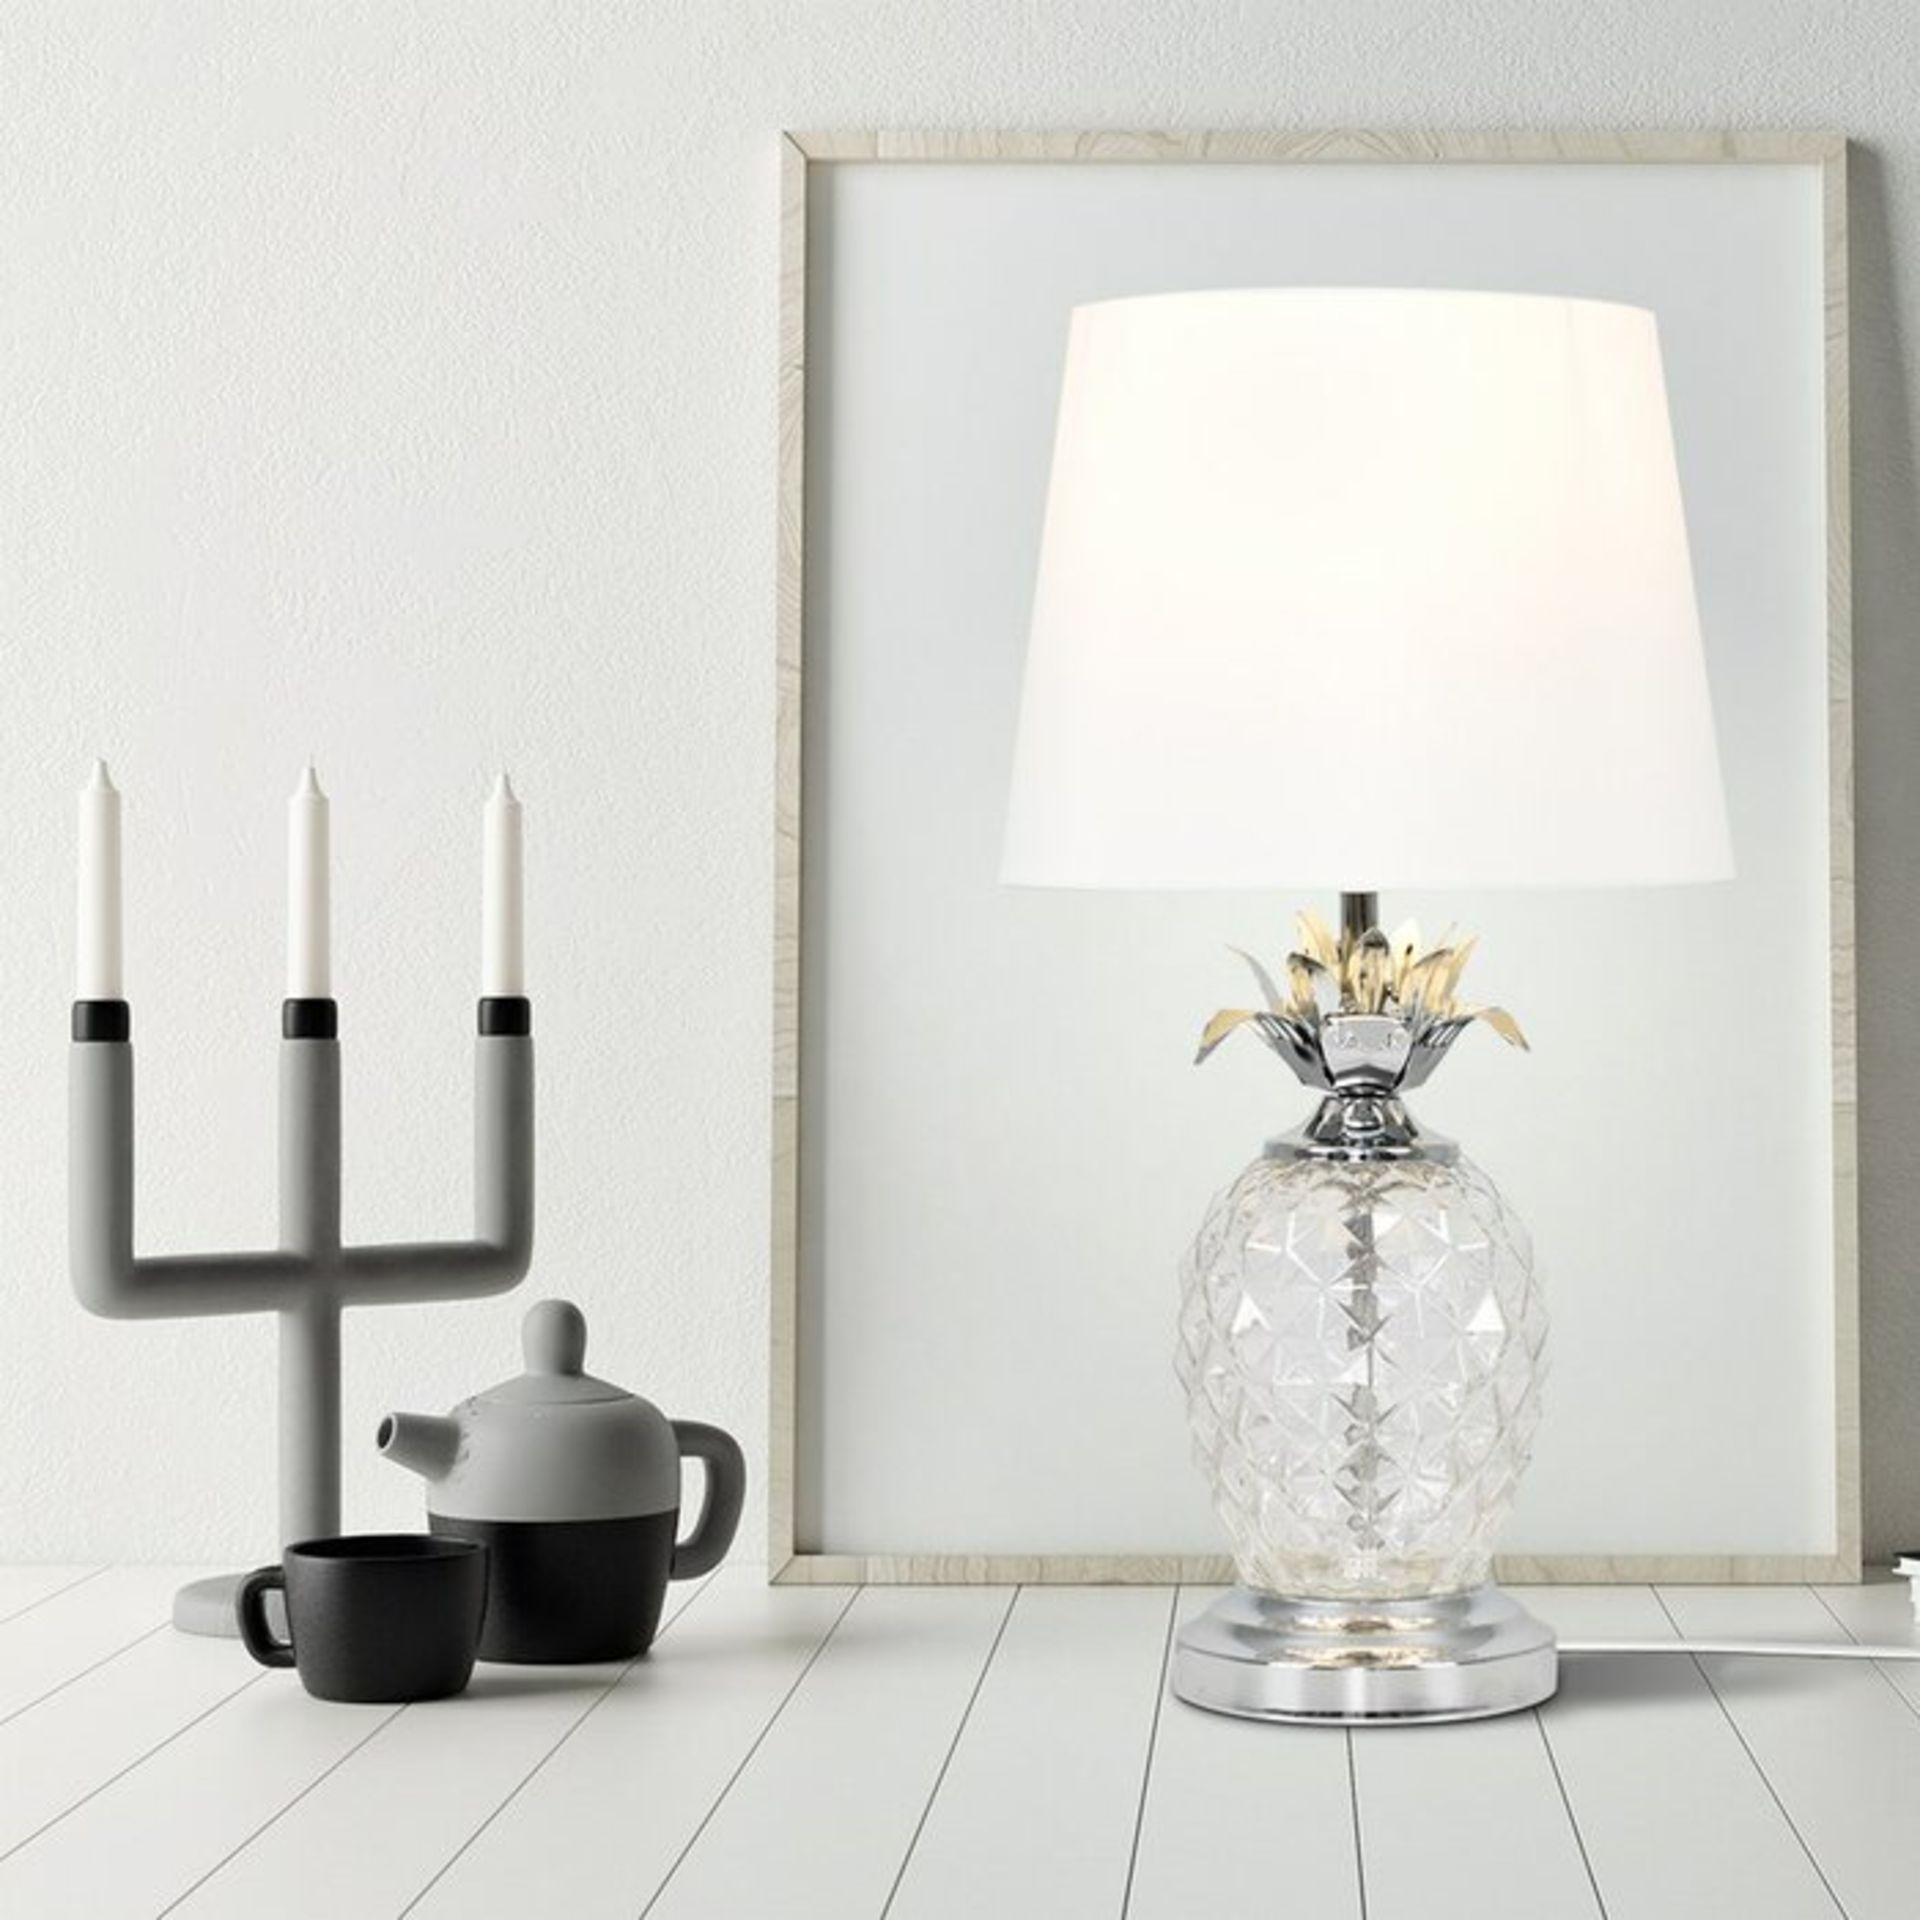 Dempster 41cm Table Lamp - RRP £49.99 - Image 2 of 3